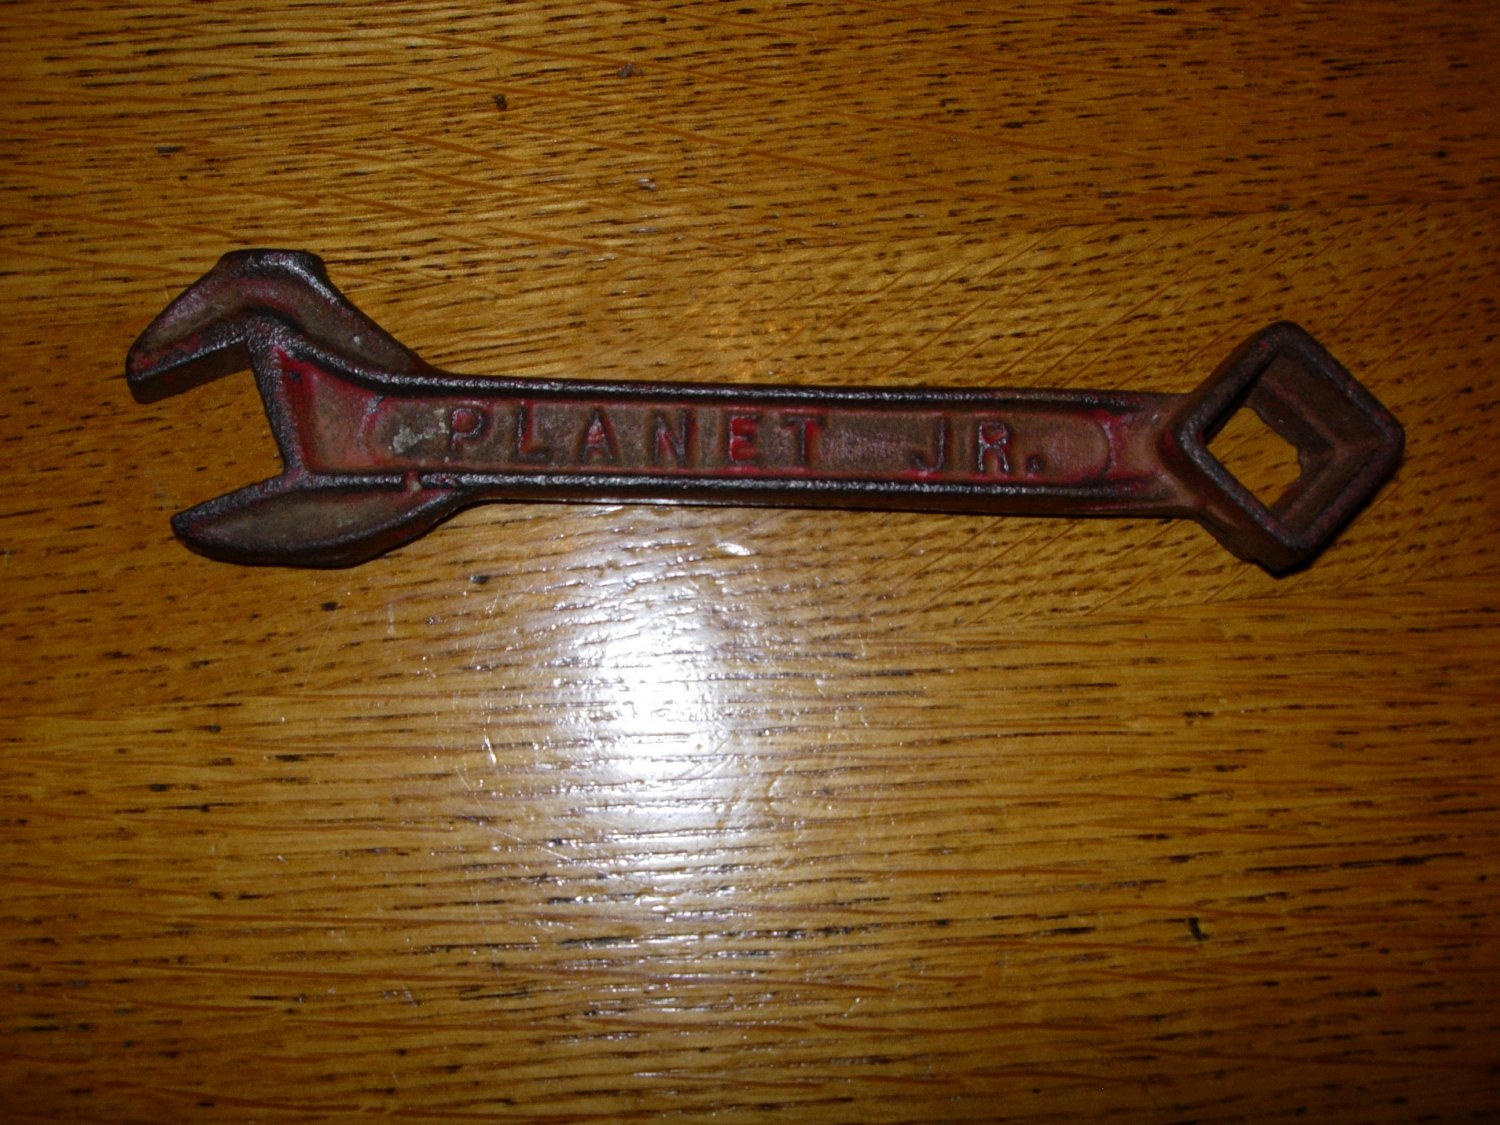 Planet JR No 3 Cultivator Wrench